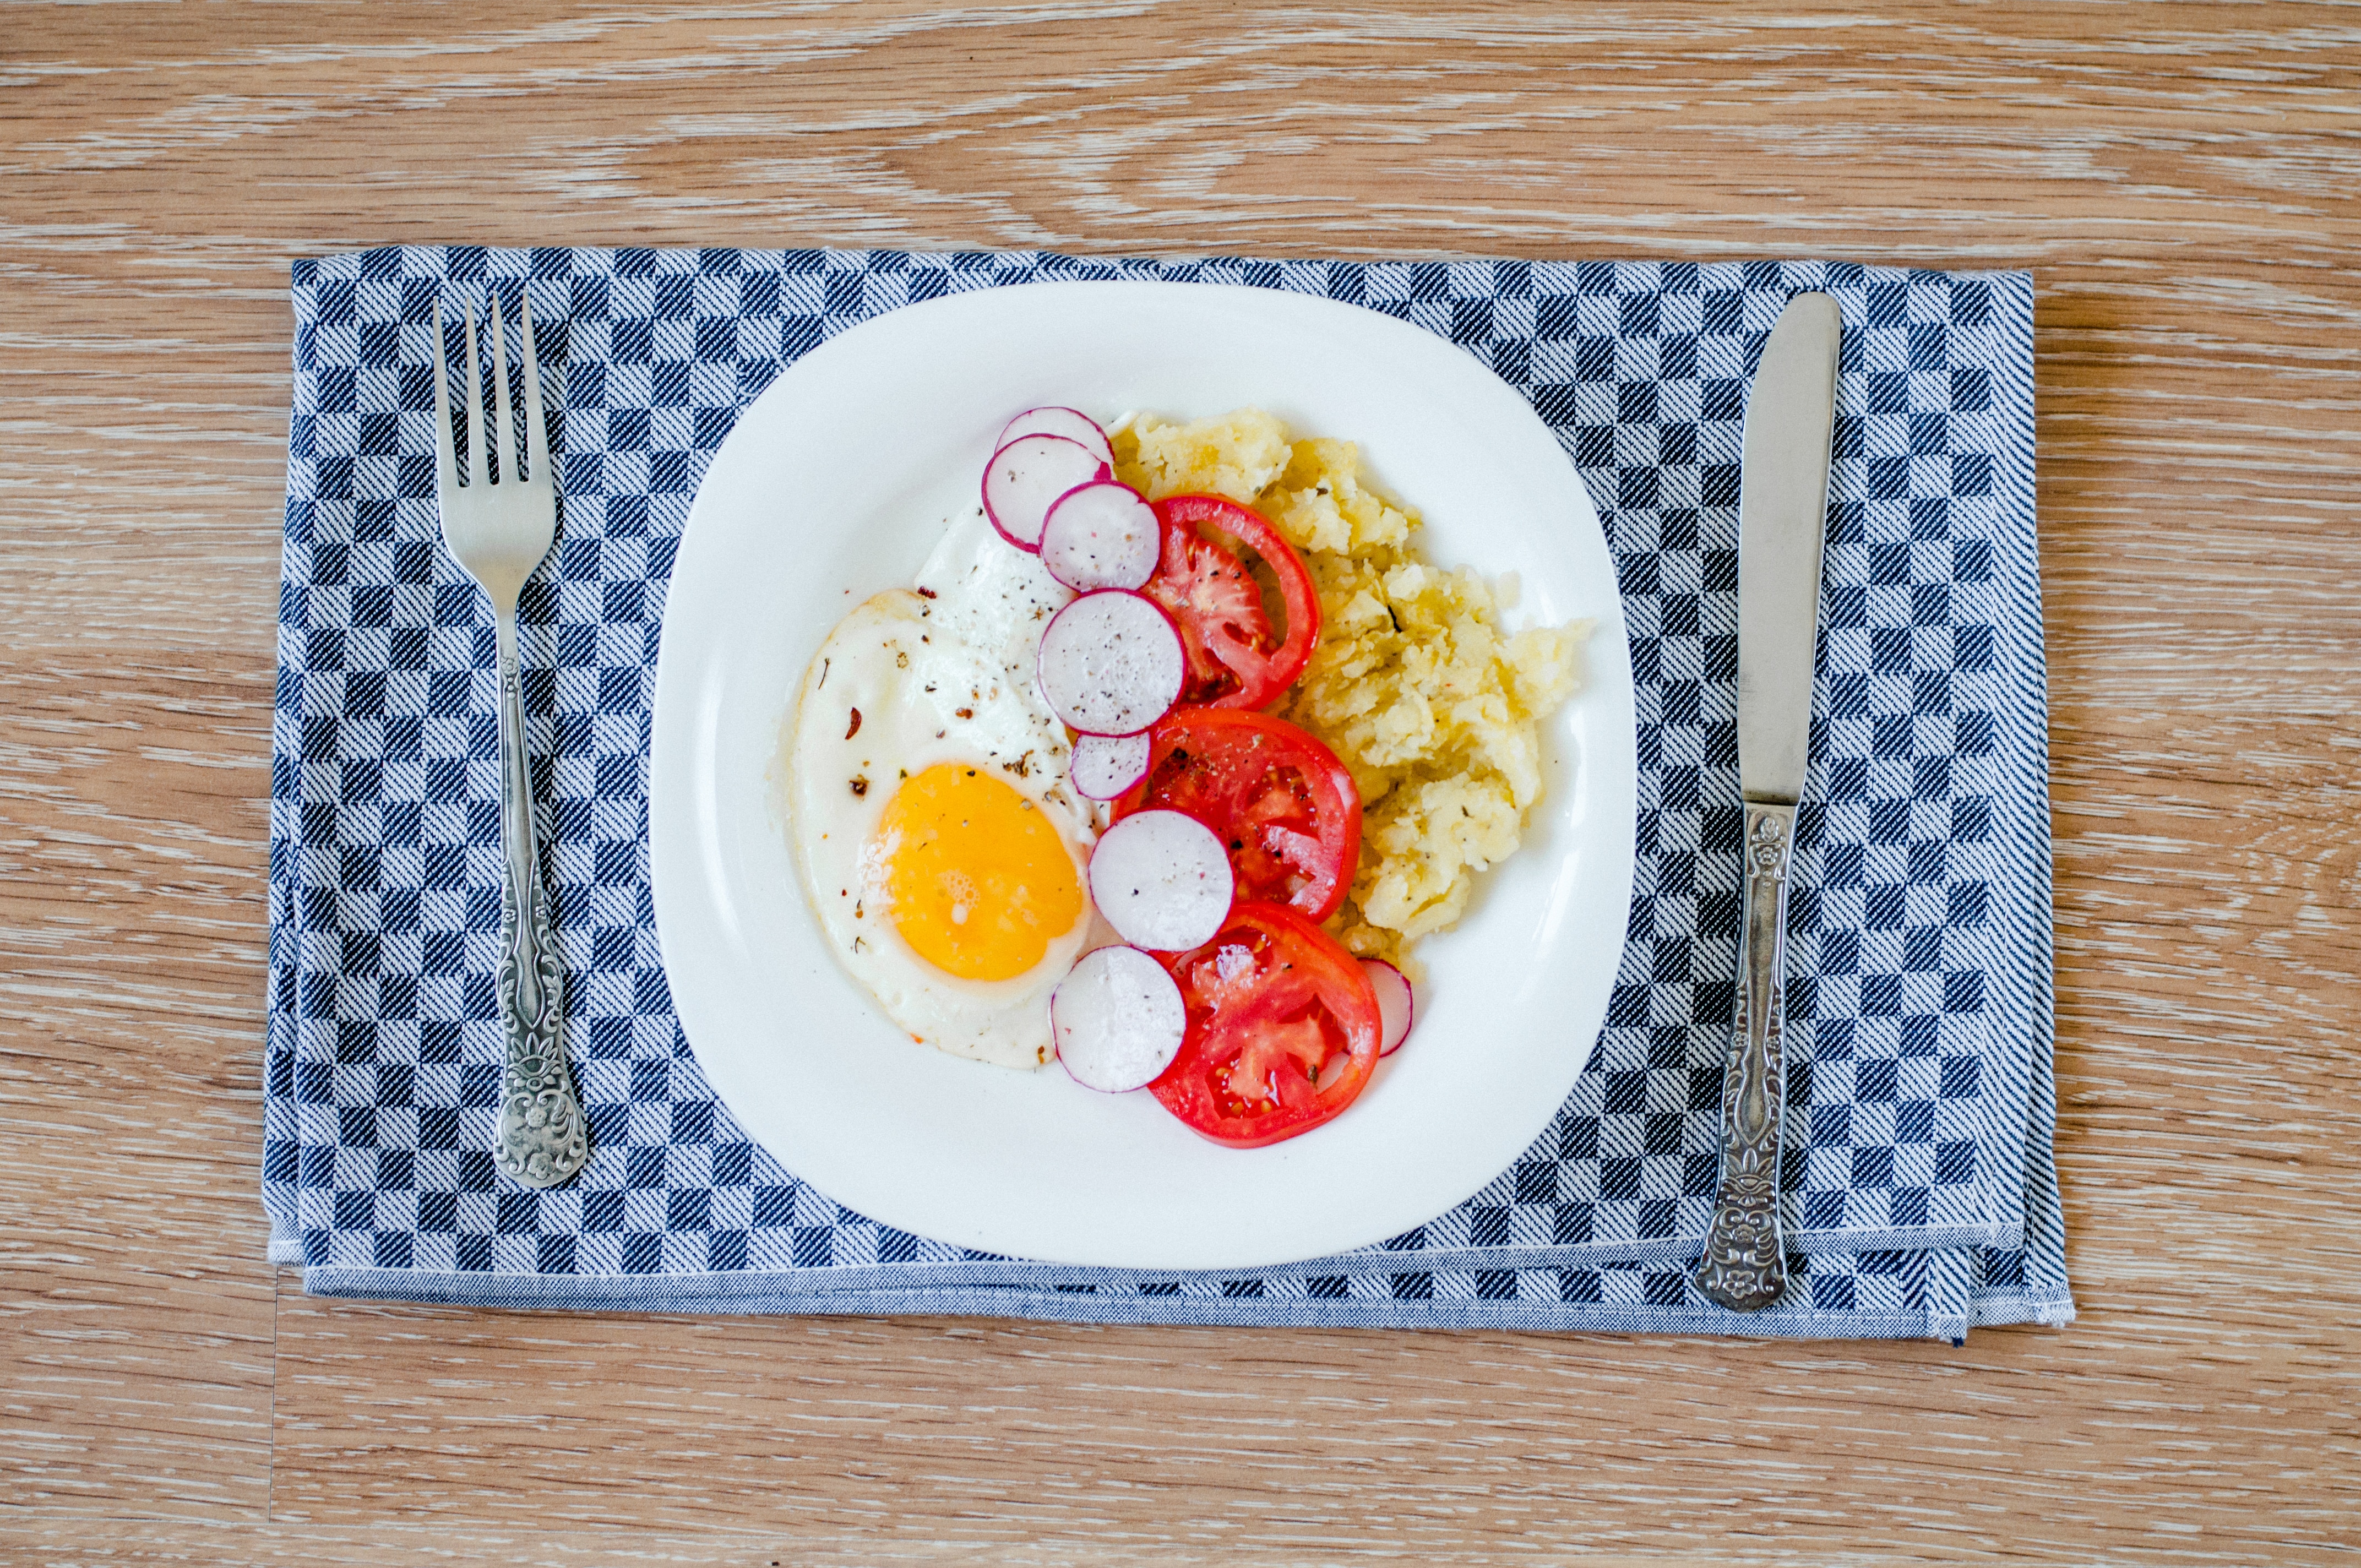 white ceramic plate with egg and vegetables on the table